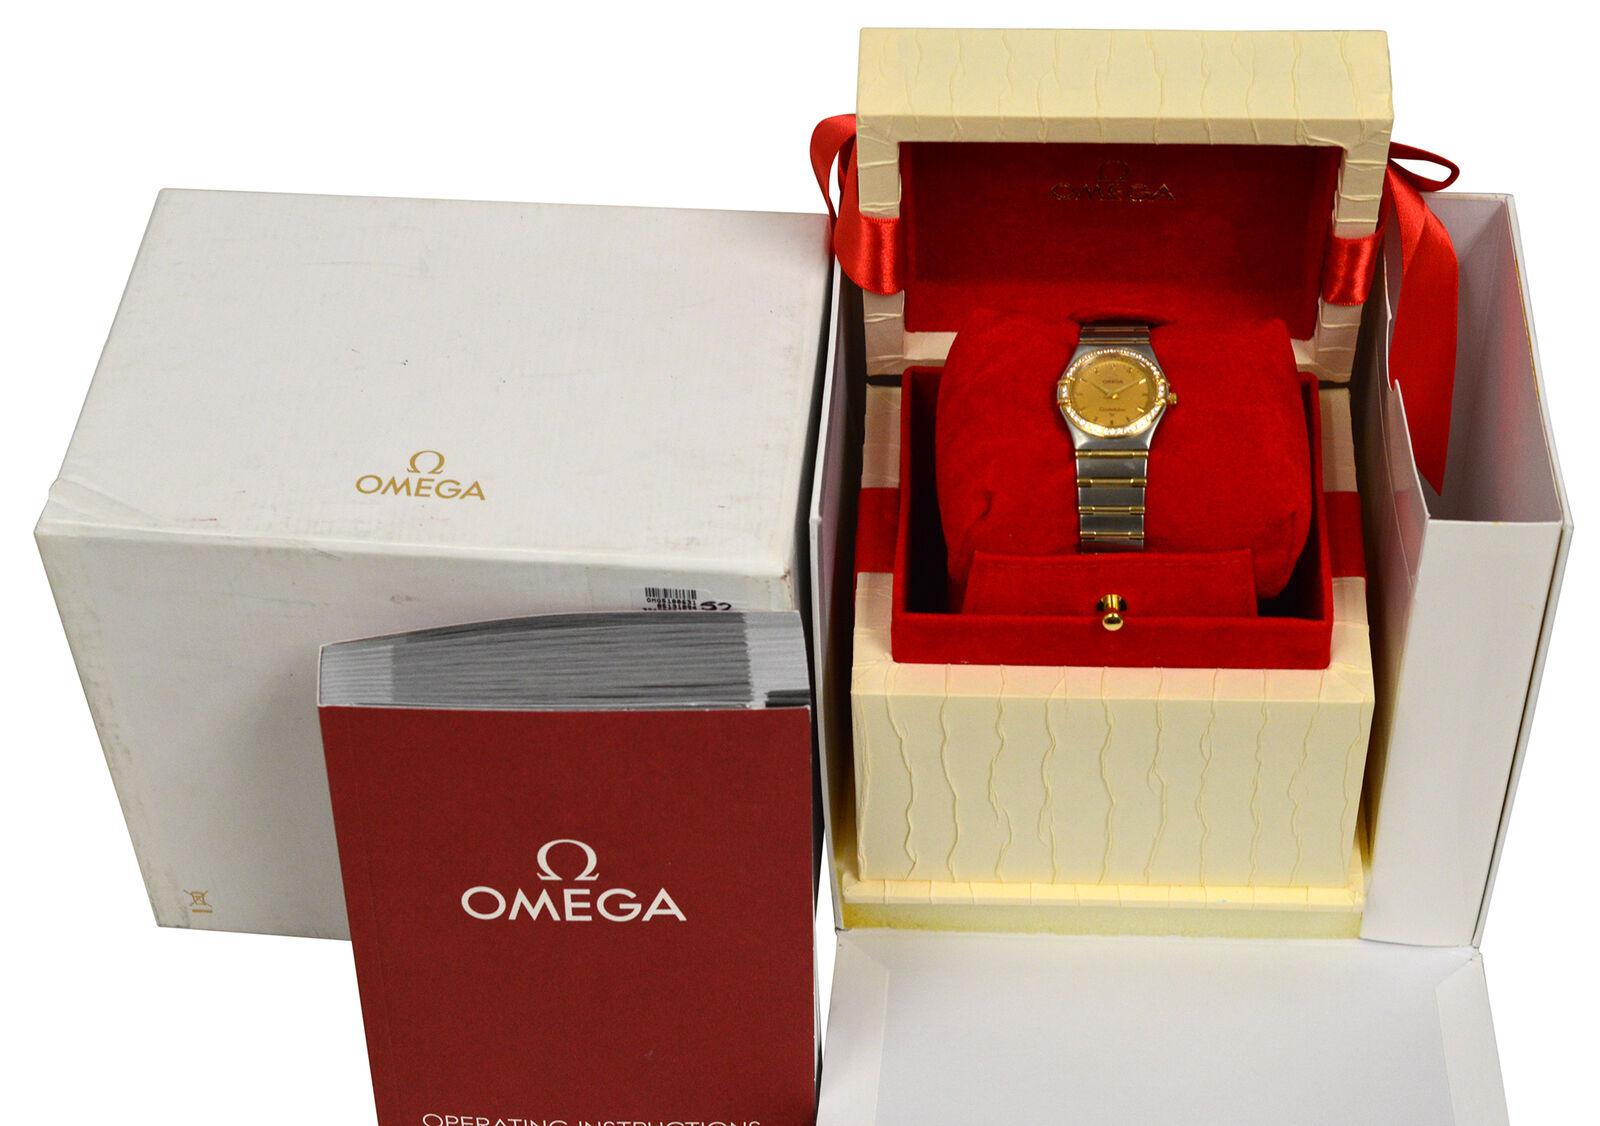 Brand	Omega
Model	Constellation 1277.10.00
Gender	Ladies
Condition	Pre - Owned
Movement	Quartz
Case Material	18K Yellow Gold & Stainless Steel
Bracelet / Strap Material	18K Yellow Gold & Stainless Steel
Clasp / Buckle Material	Stainless Steel with